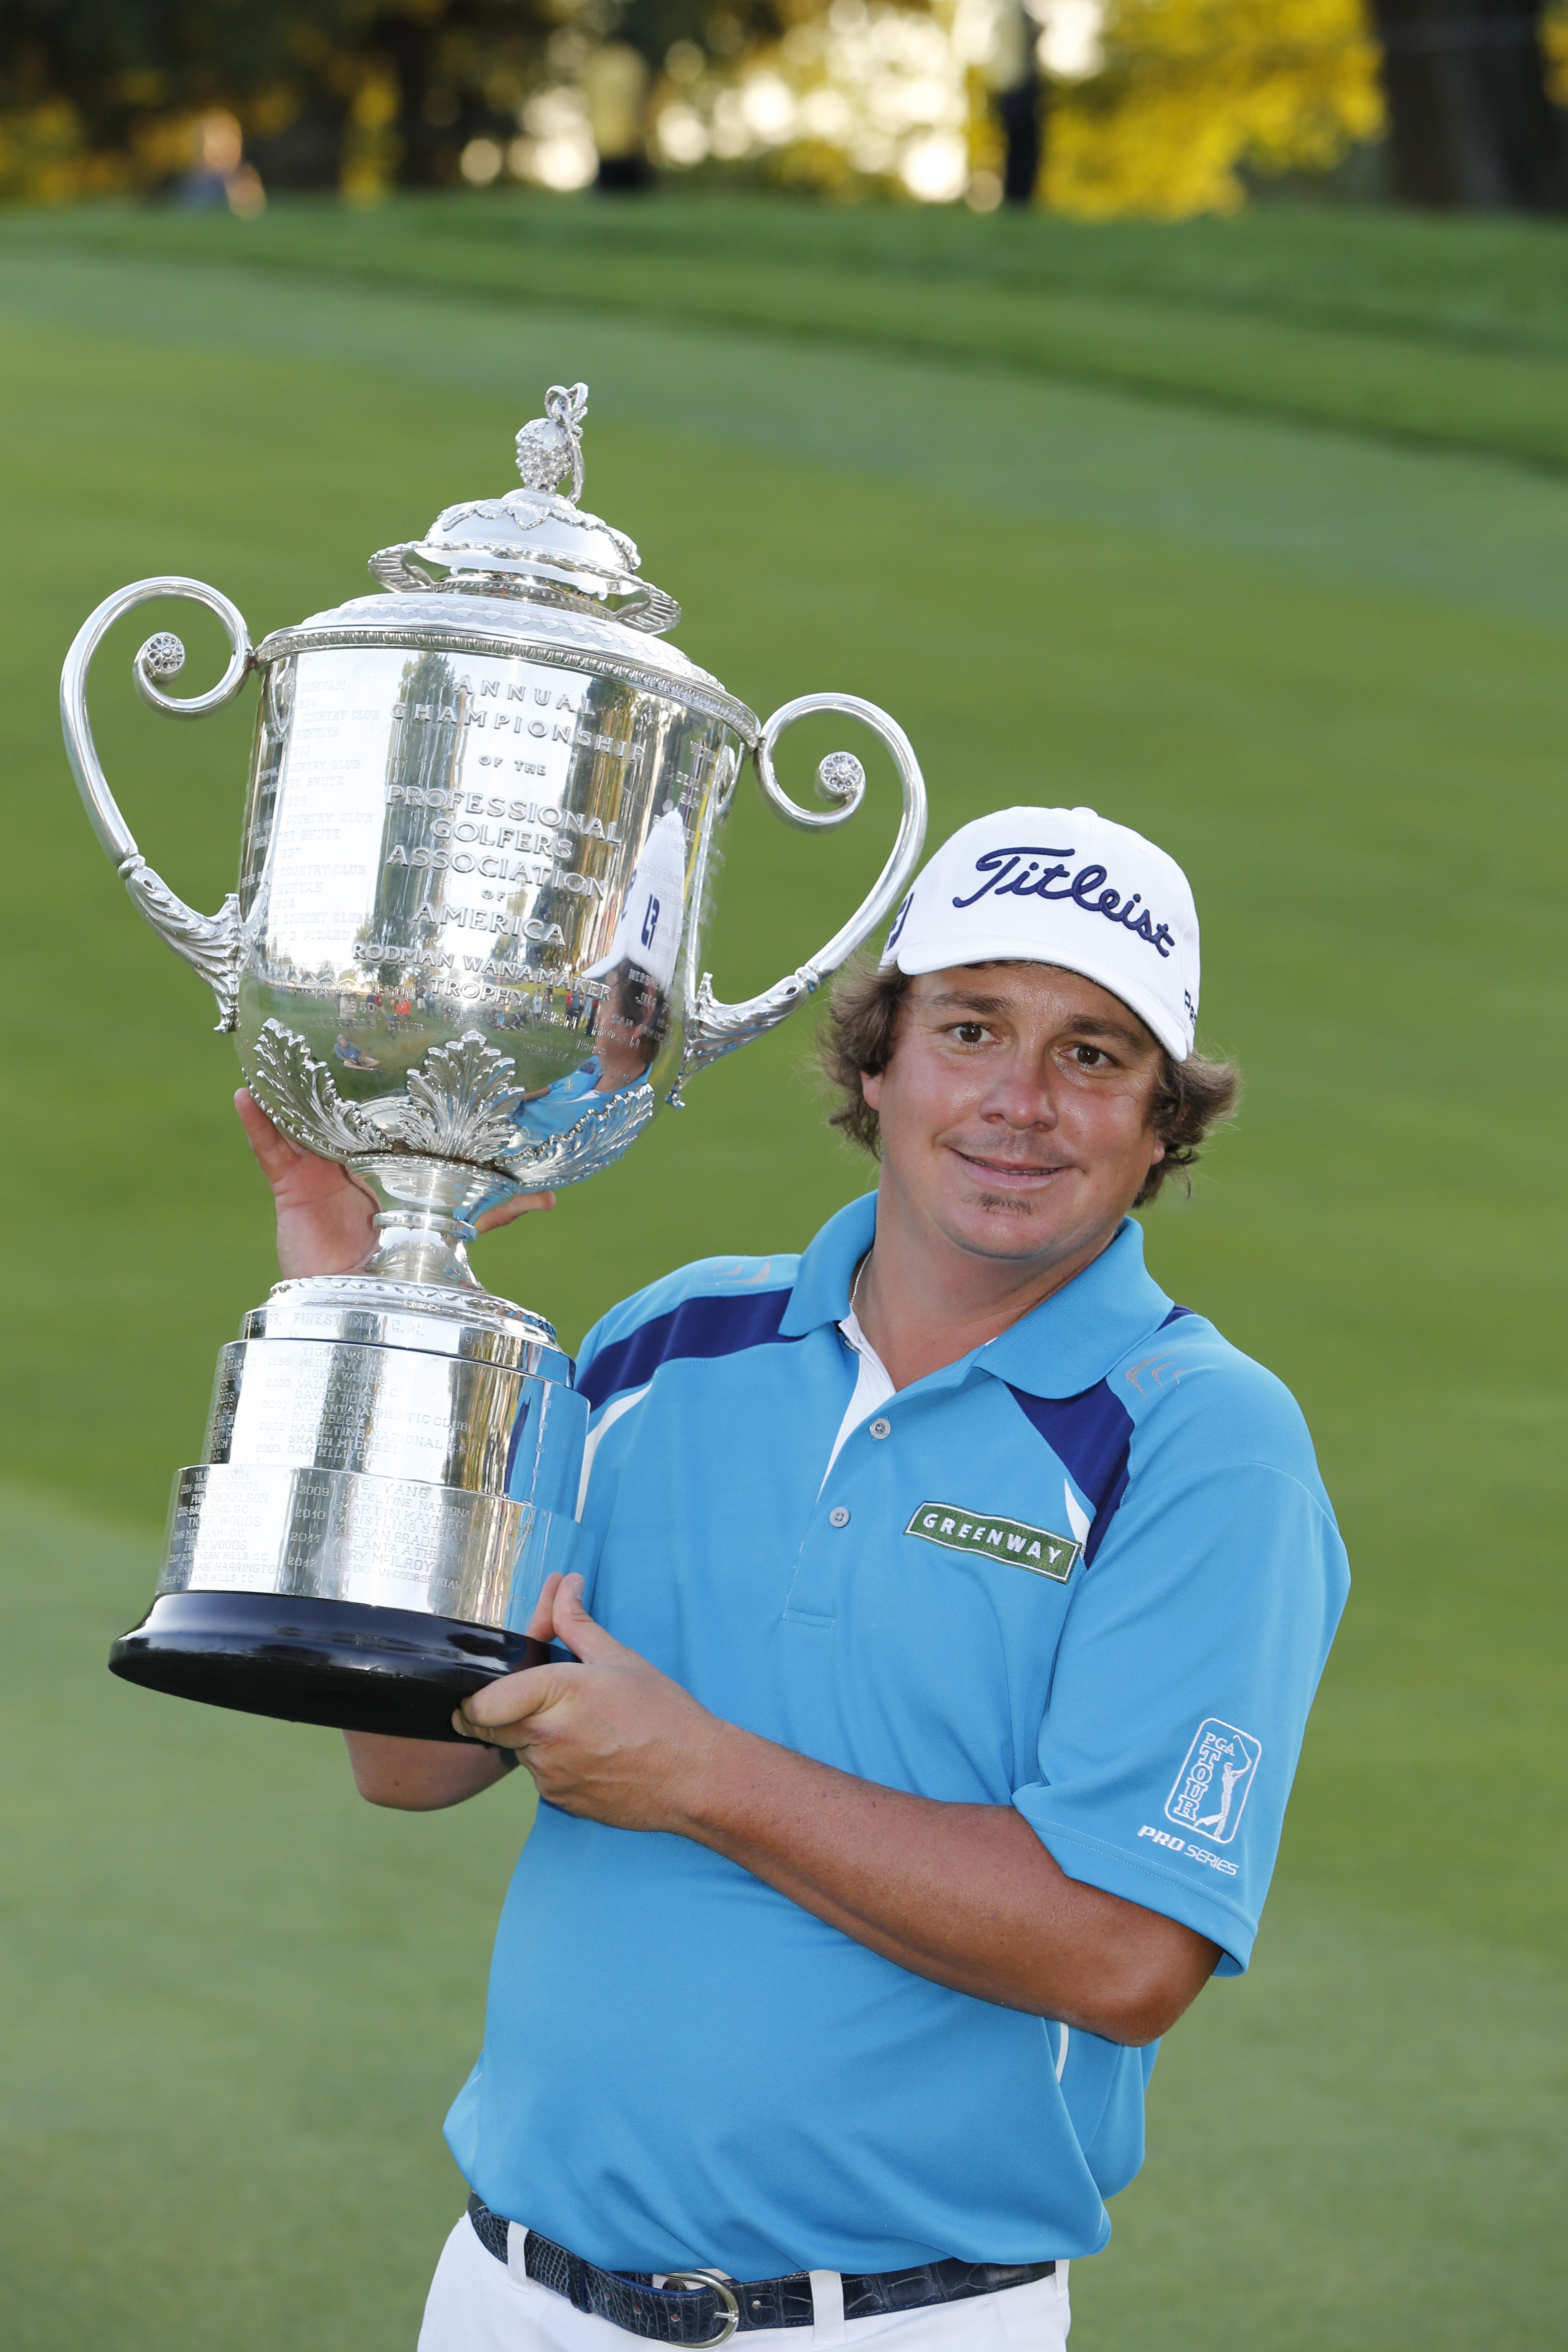 Quotes from the PGA Championship